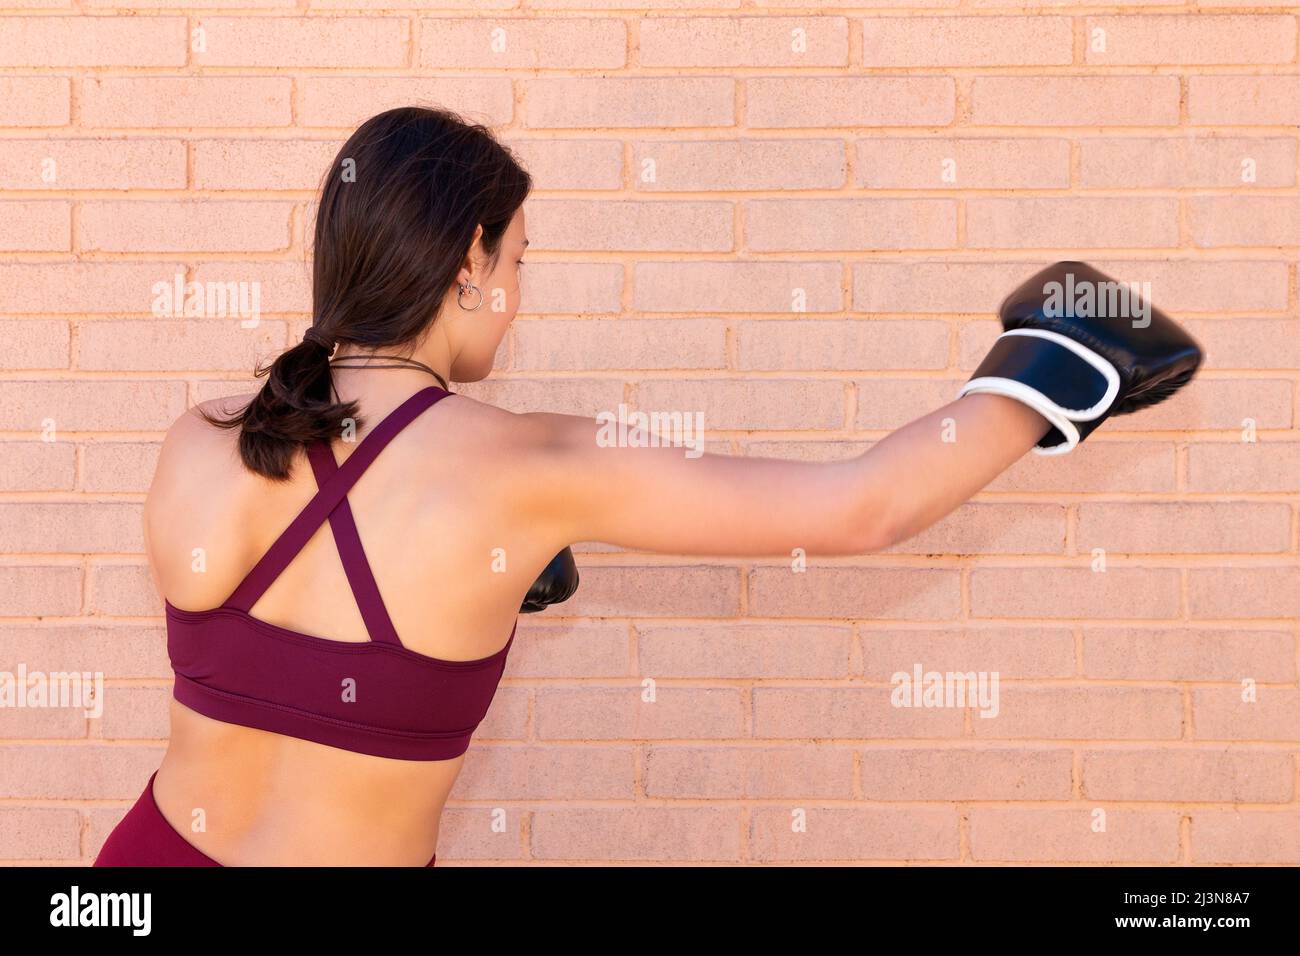 An unknown young Caucasian woman with boxing gloves is punching seen from the side and her back. The arm movement is captured in the photograph. The b Stock Photo